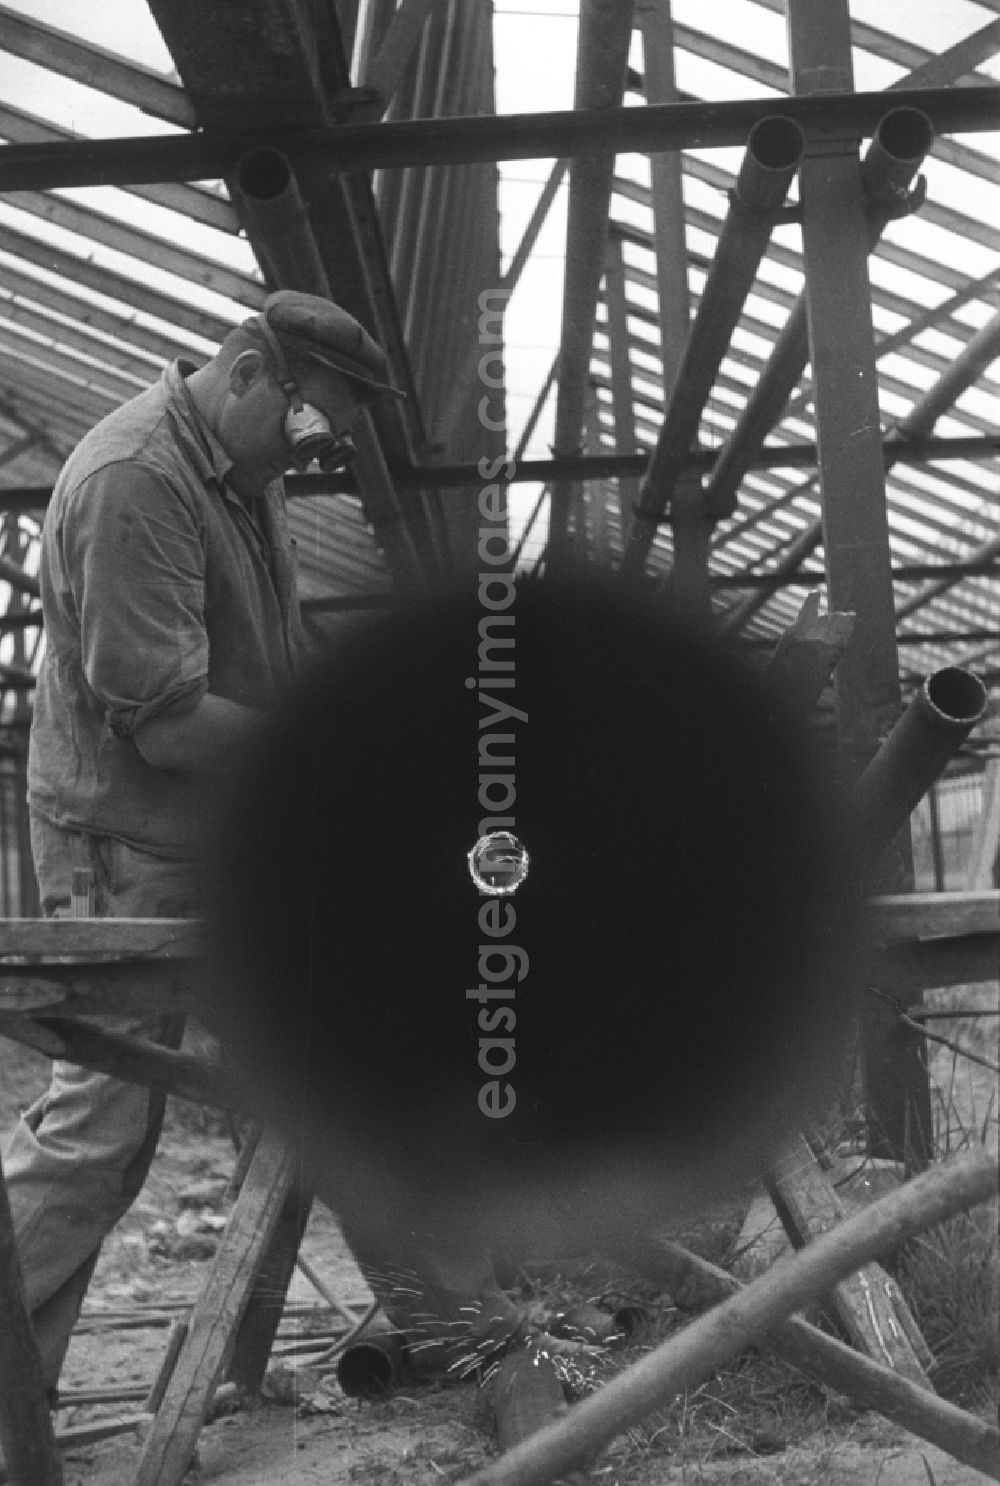 GDR image archive: Trinwillershagen - New construction of a greenhouse on the German Agricultural Production Cooperative LPG Rotes Banner in Trinwillershagen in Mecklenburg-Western Pomerania